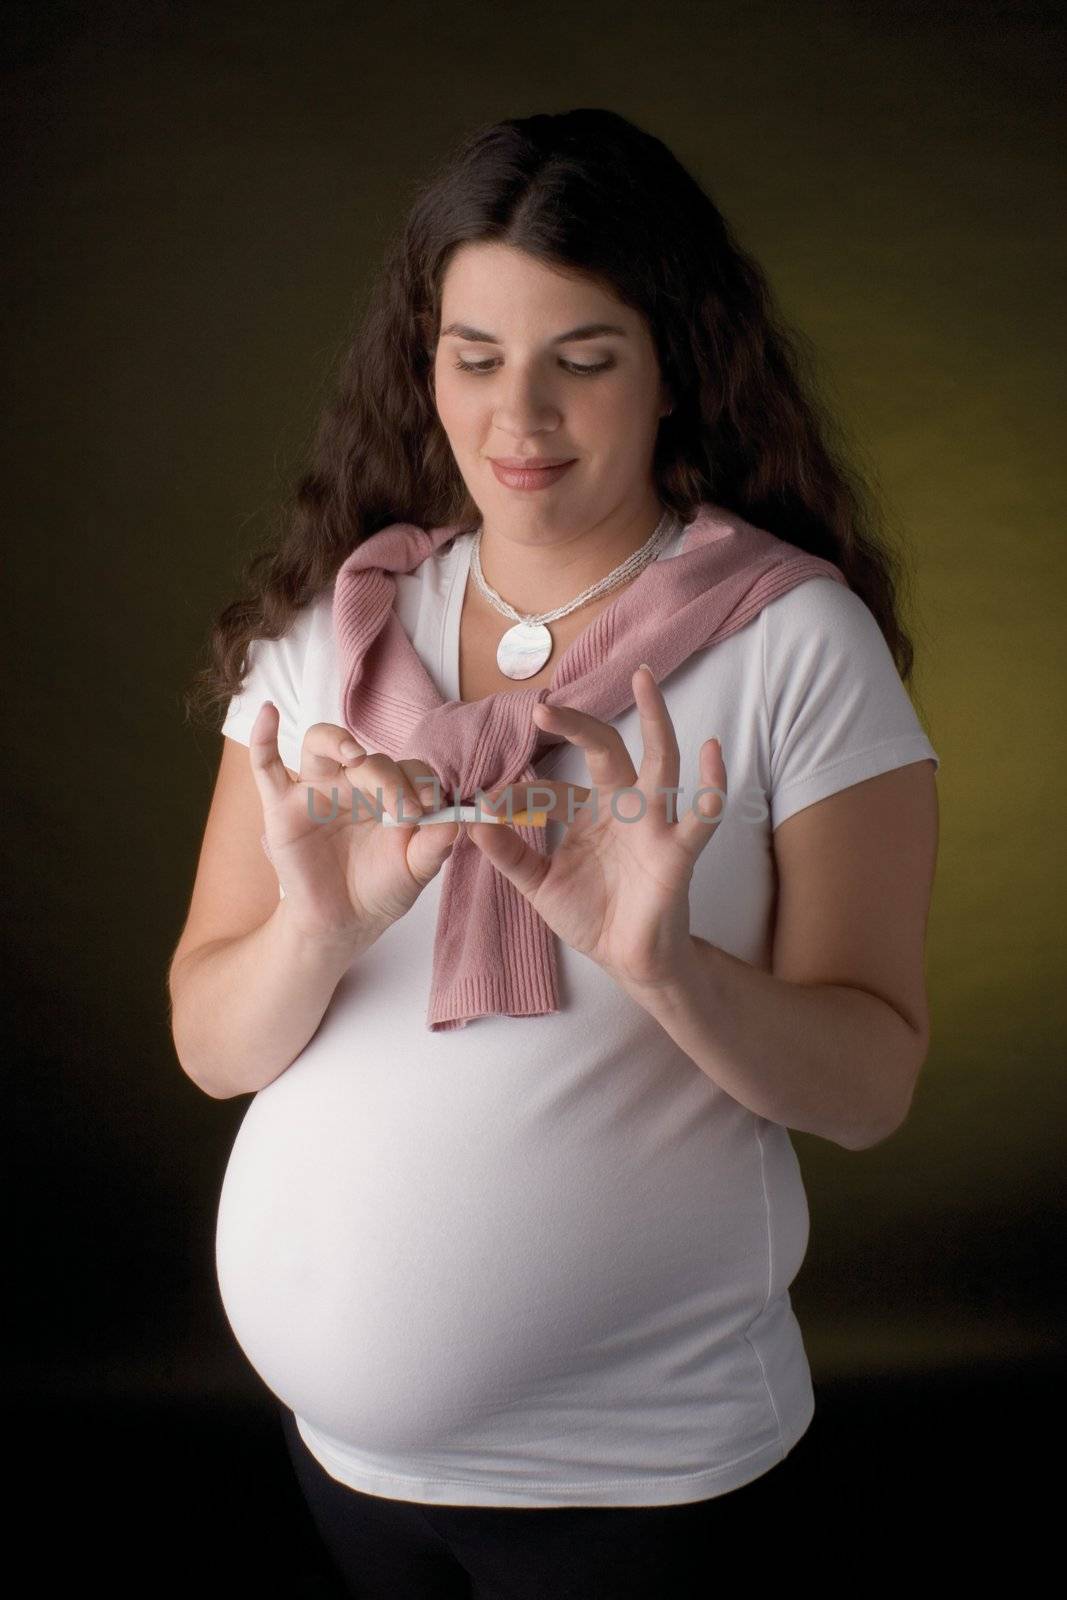 Seven month pregnant women holding a cigarette in her hand